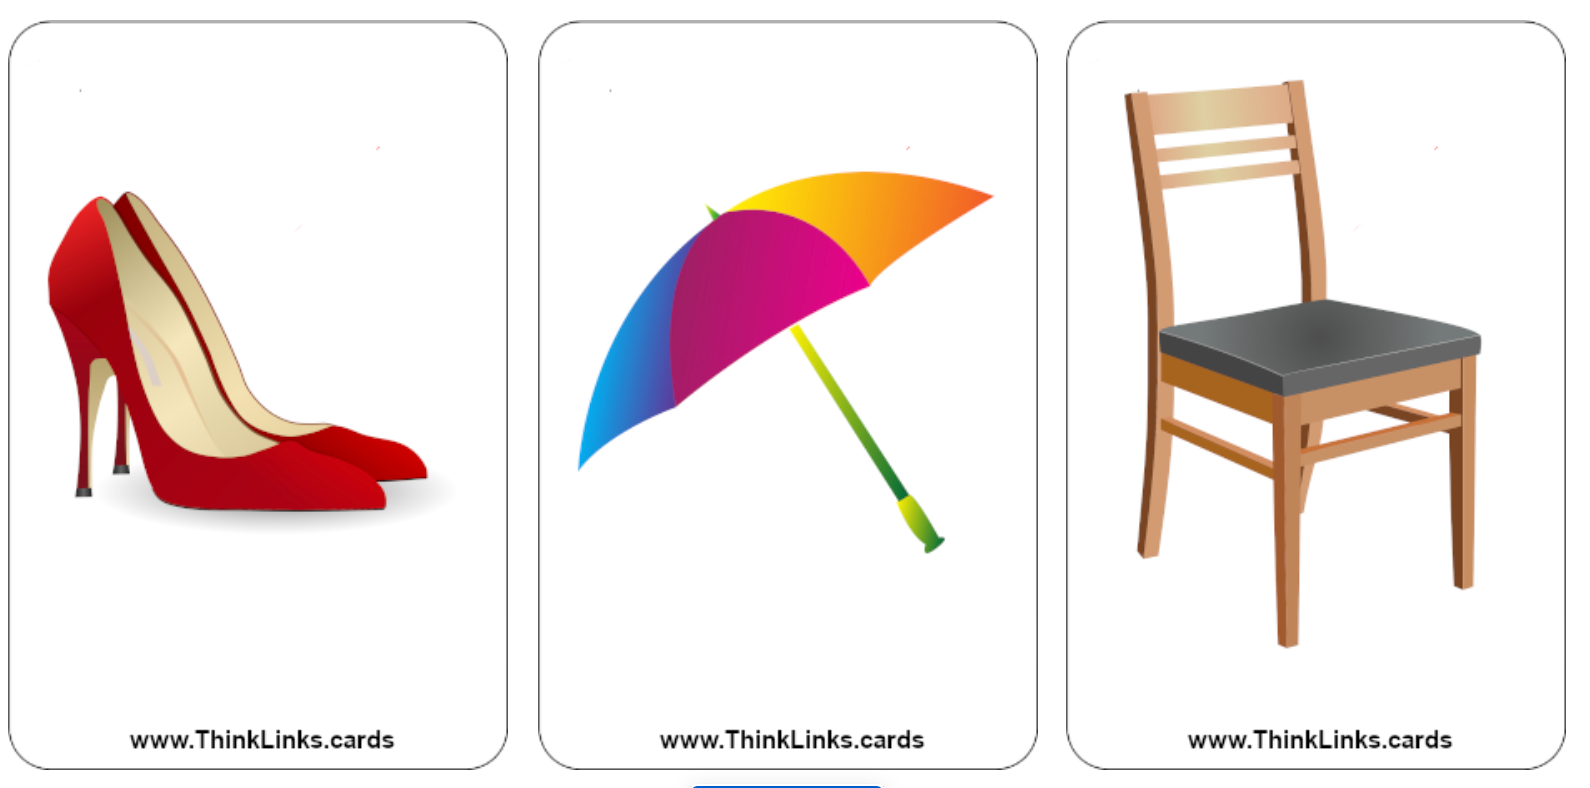 Think Links icebreaker game cards of high-heel shoes, umbrella, chair